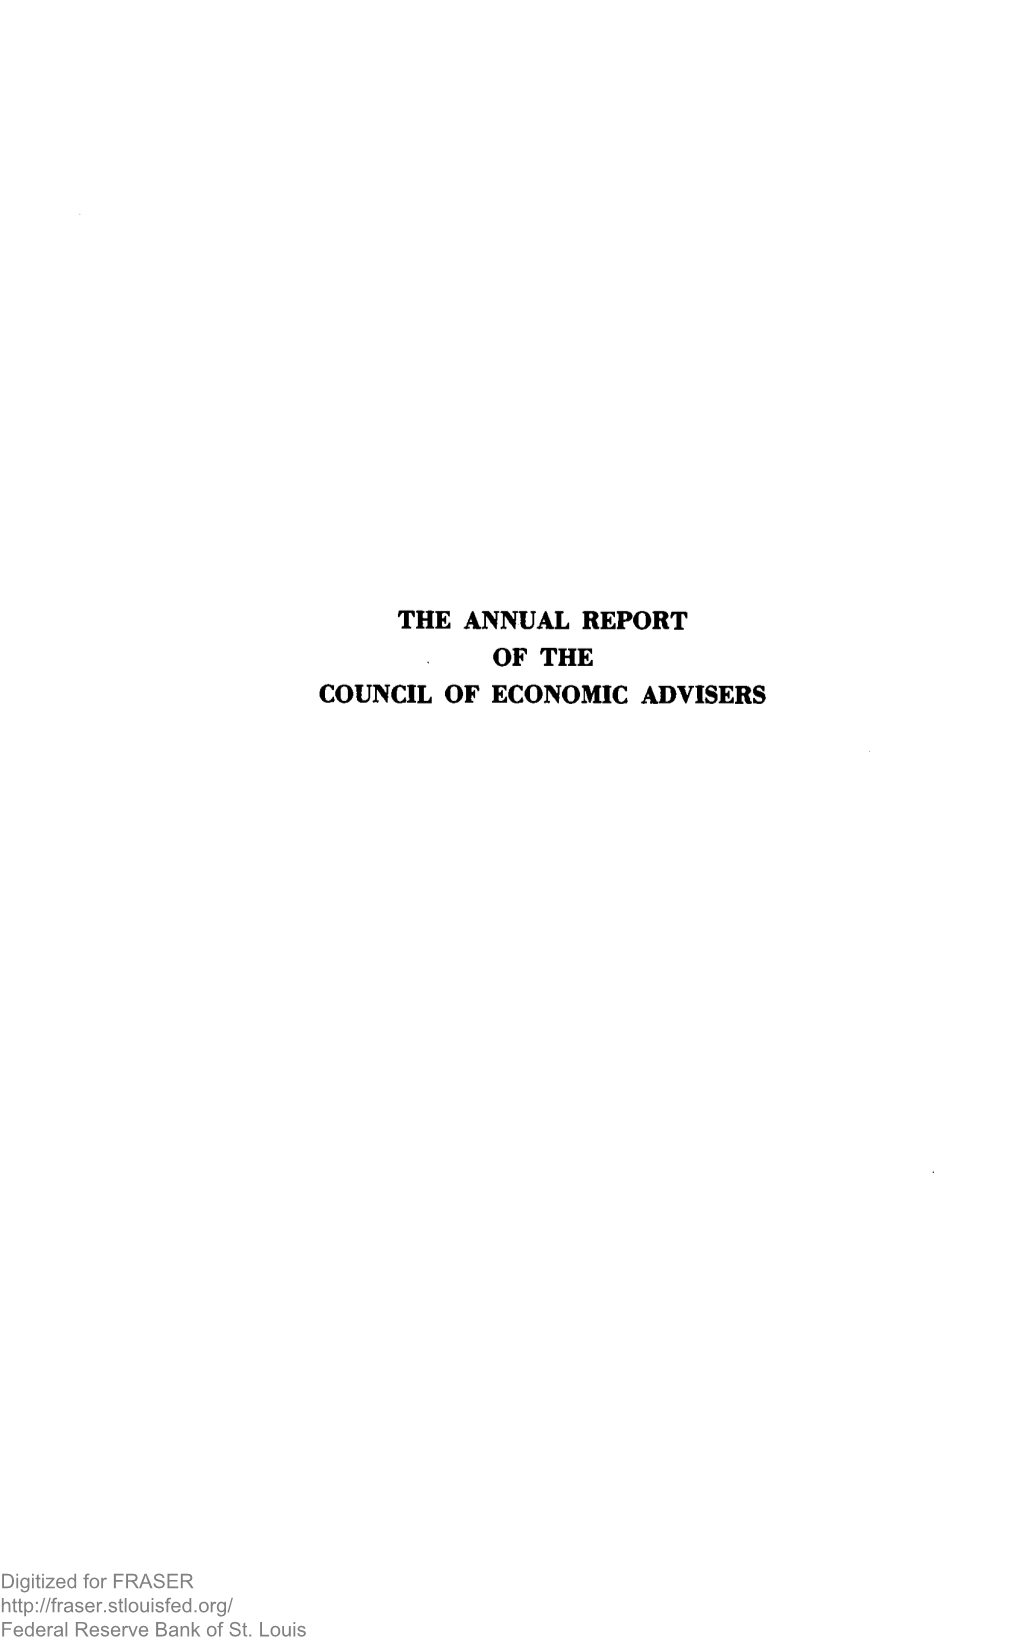 Annual Report of the Council of Economic Advisers 1989